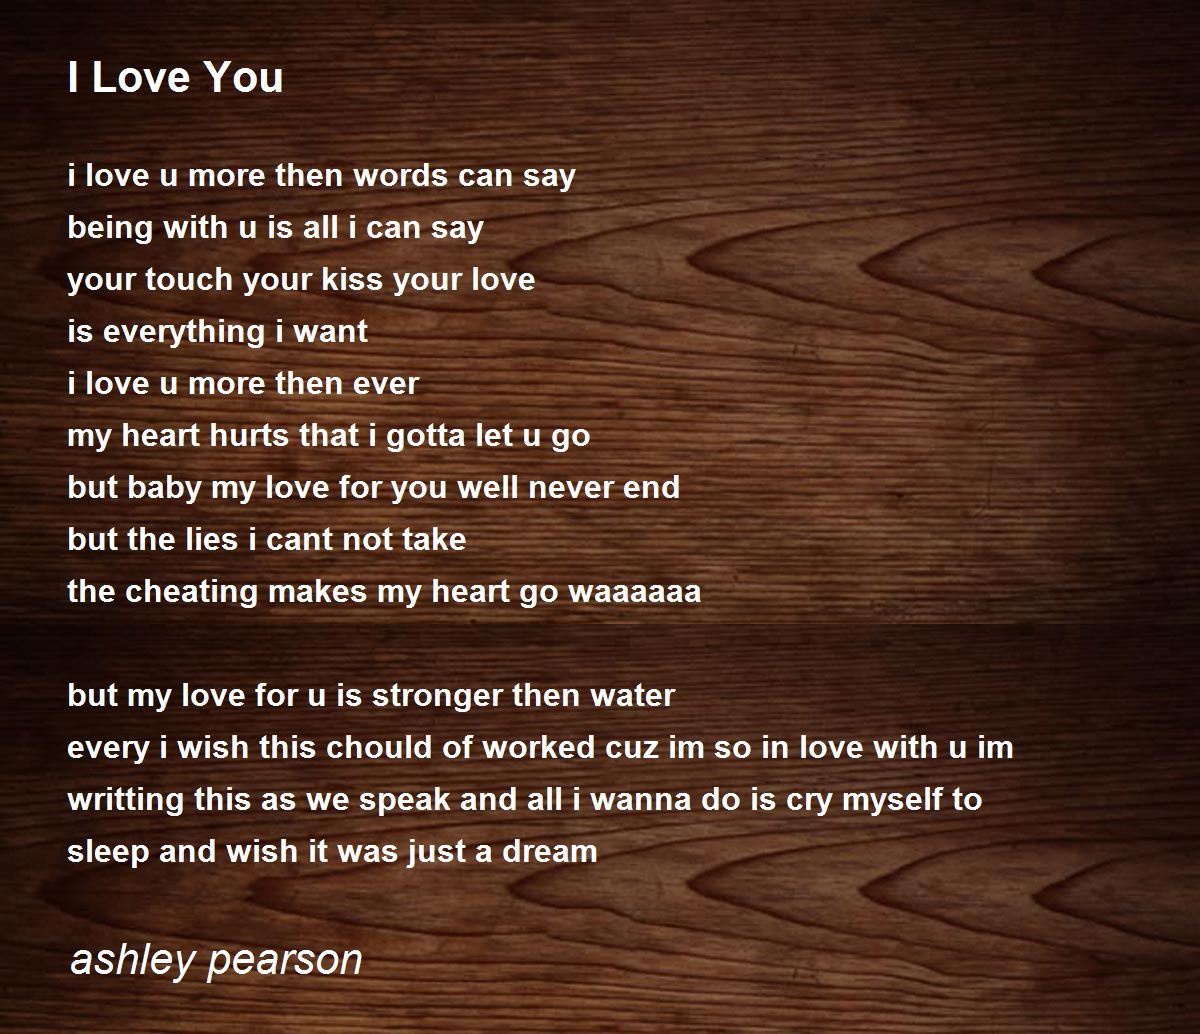 I Love You - I Love You Poem by ashley pearson